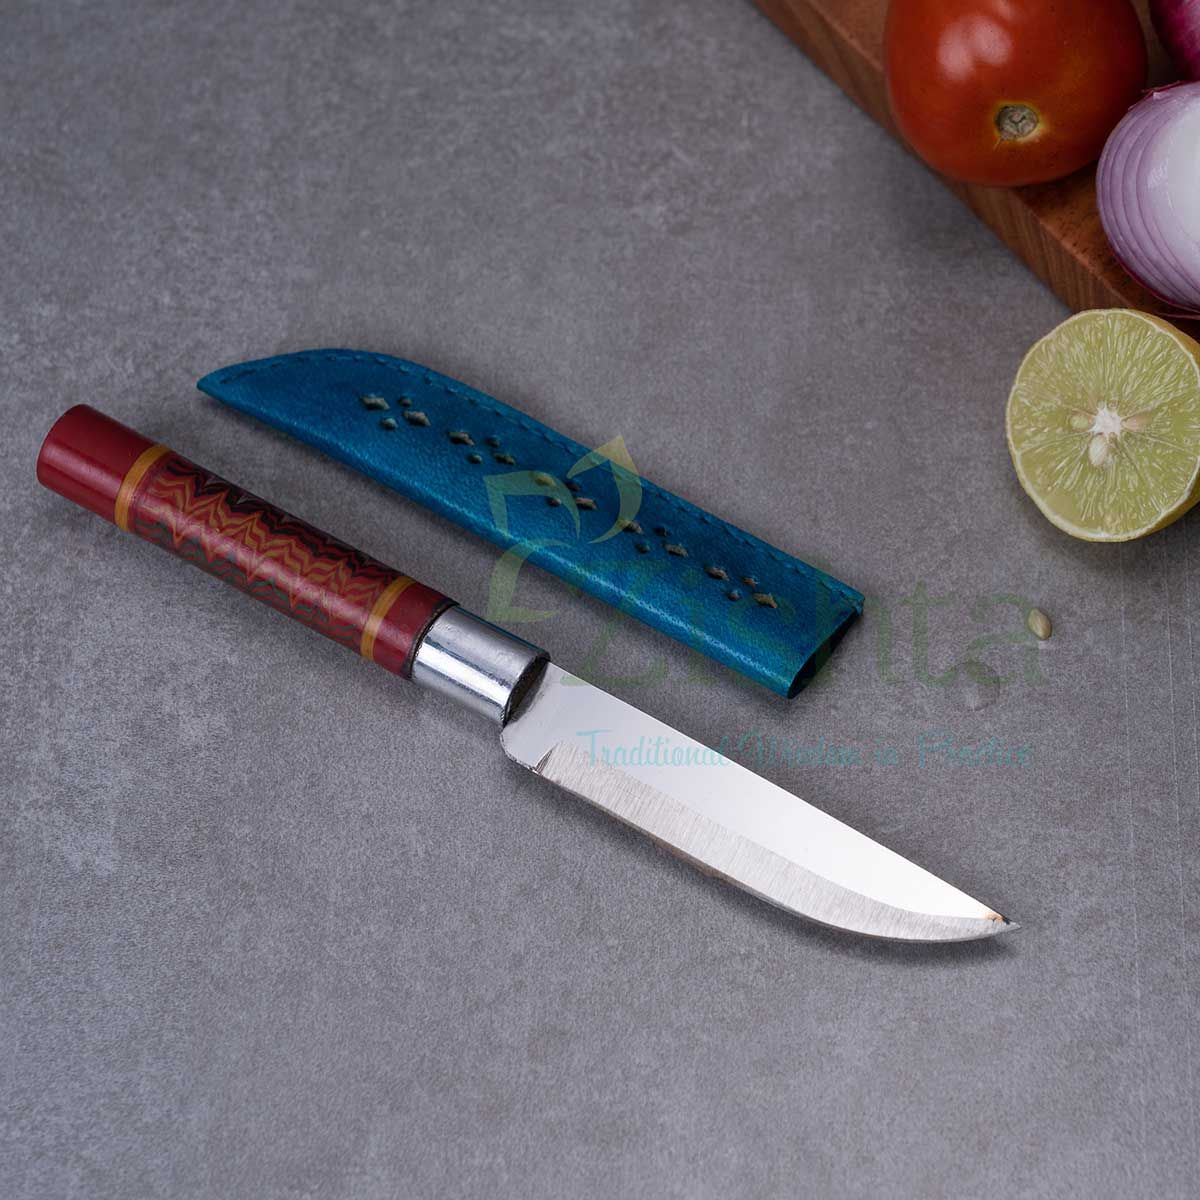 Reha Kitchen Fruit Knife With Lac Turned Wooden Handle-Zishta Traditional Cookware